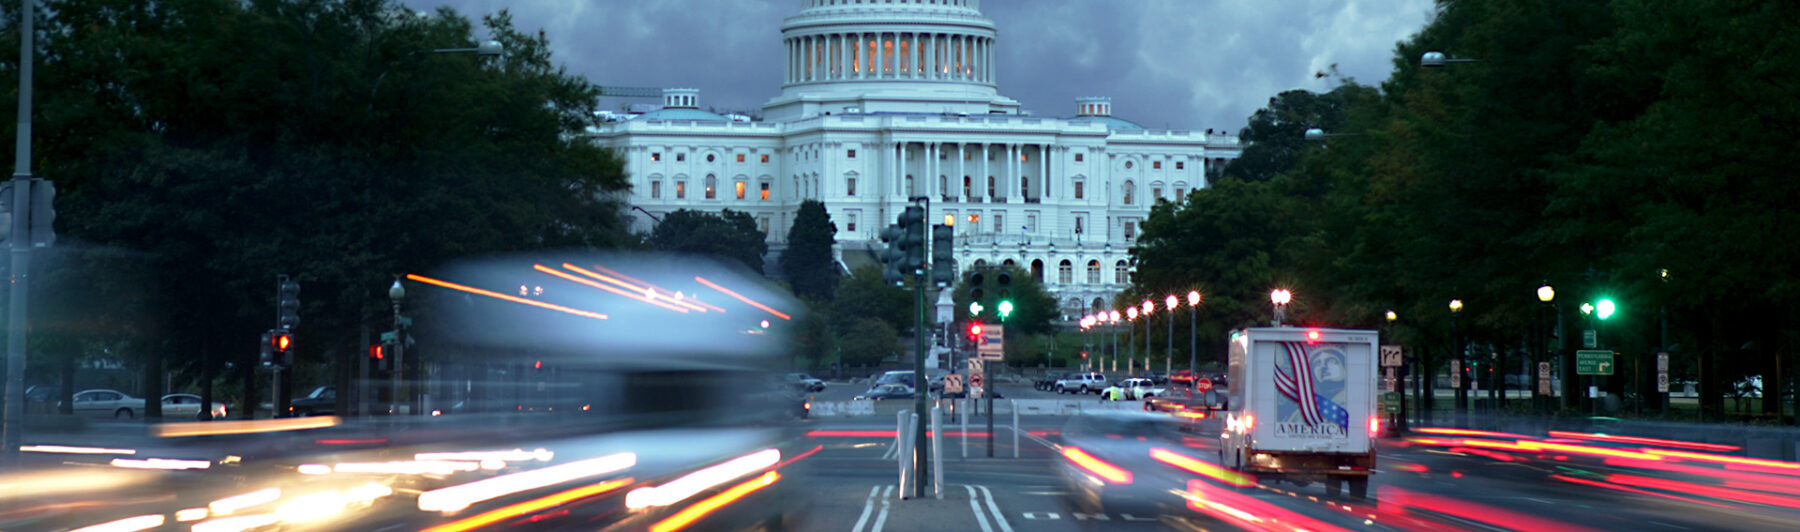 Gridlock is Good: What the U.S. Midterm Elections Mean for Markets